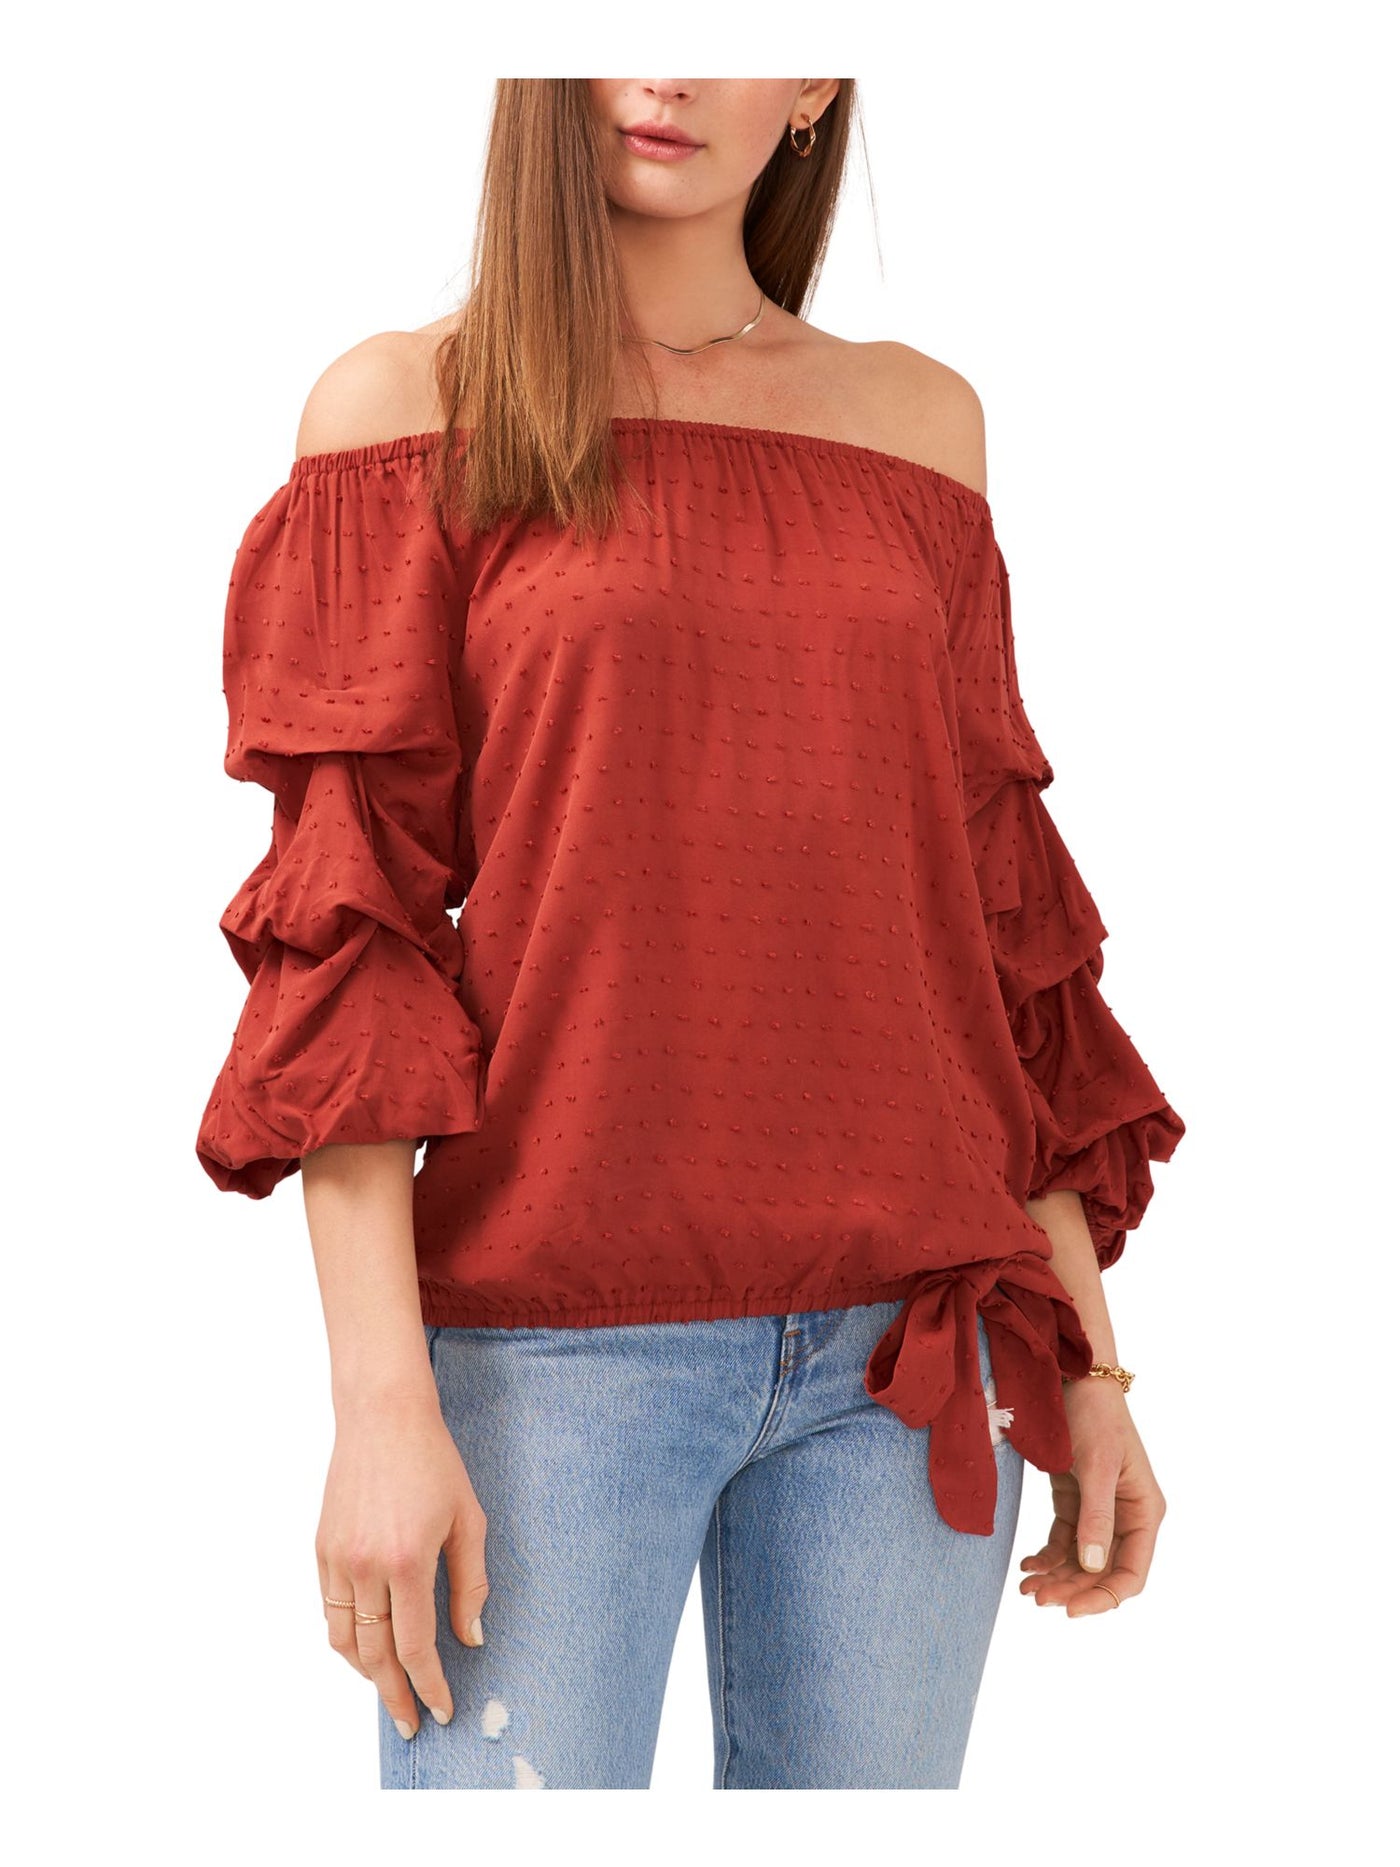 VINCE CAMUTO Womens Brown Ruffled 3/4 Sleeve Off Shoulder Party Top S